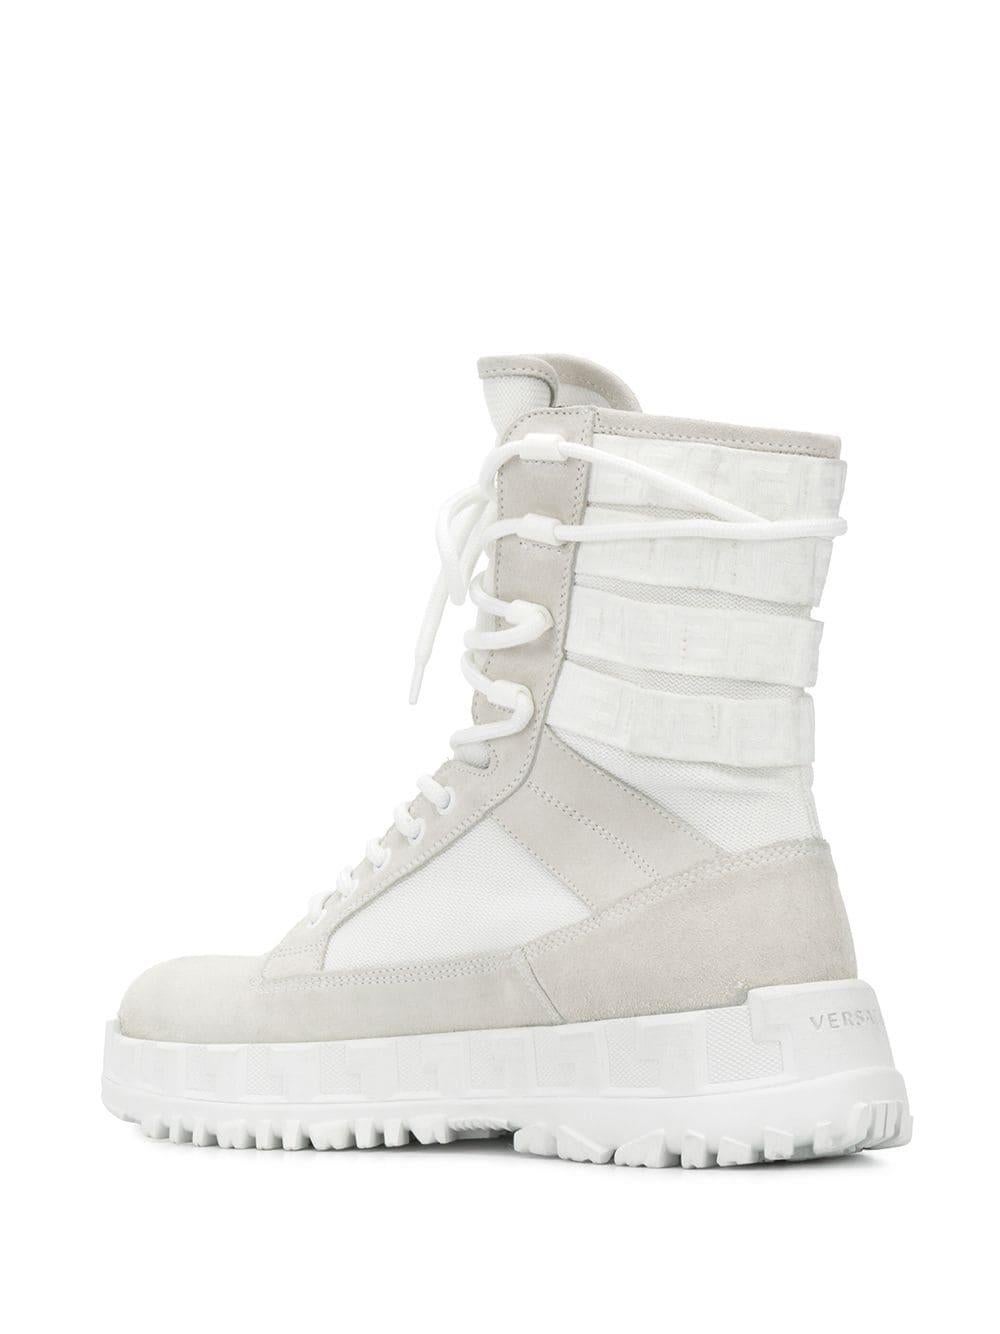 Versace Mens SS20 Runway White Mid-Calf Lace-Up Combat Boots / Sneakers

Debuting on the Spring-Summer 2020 runway, the Greca Rhegis combat boots are not your average shoes.  With a mid-calf length, they have a strappy detail on the back,